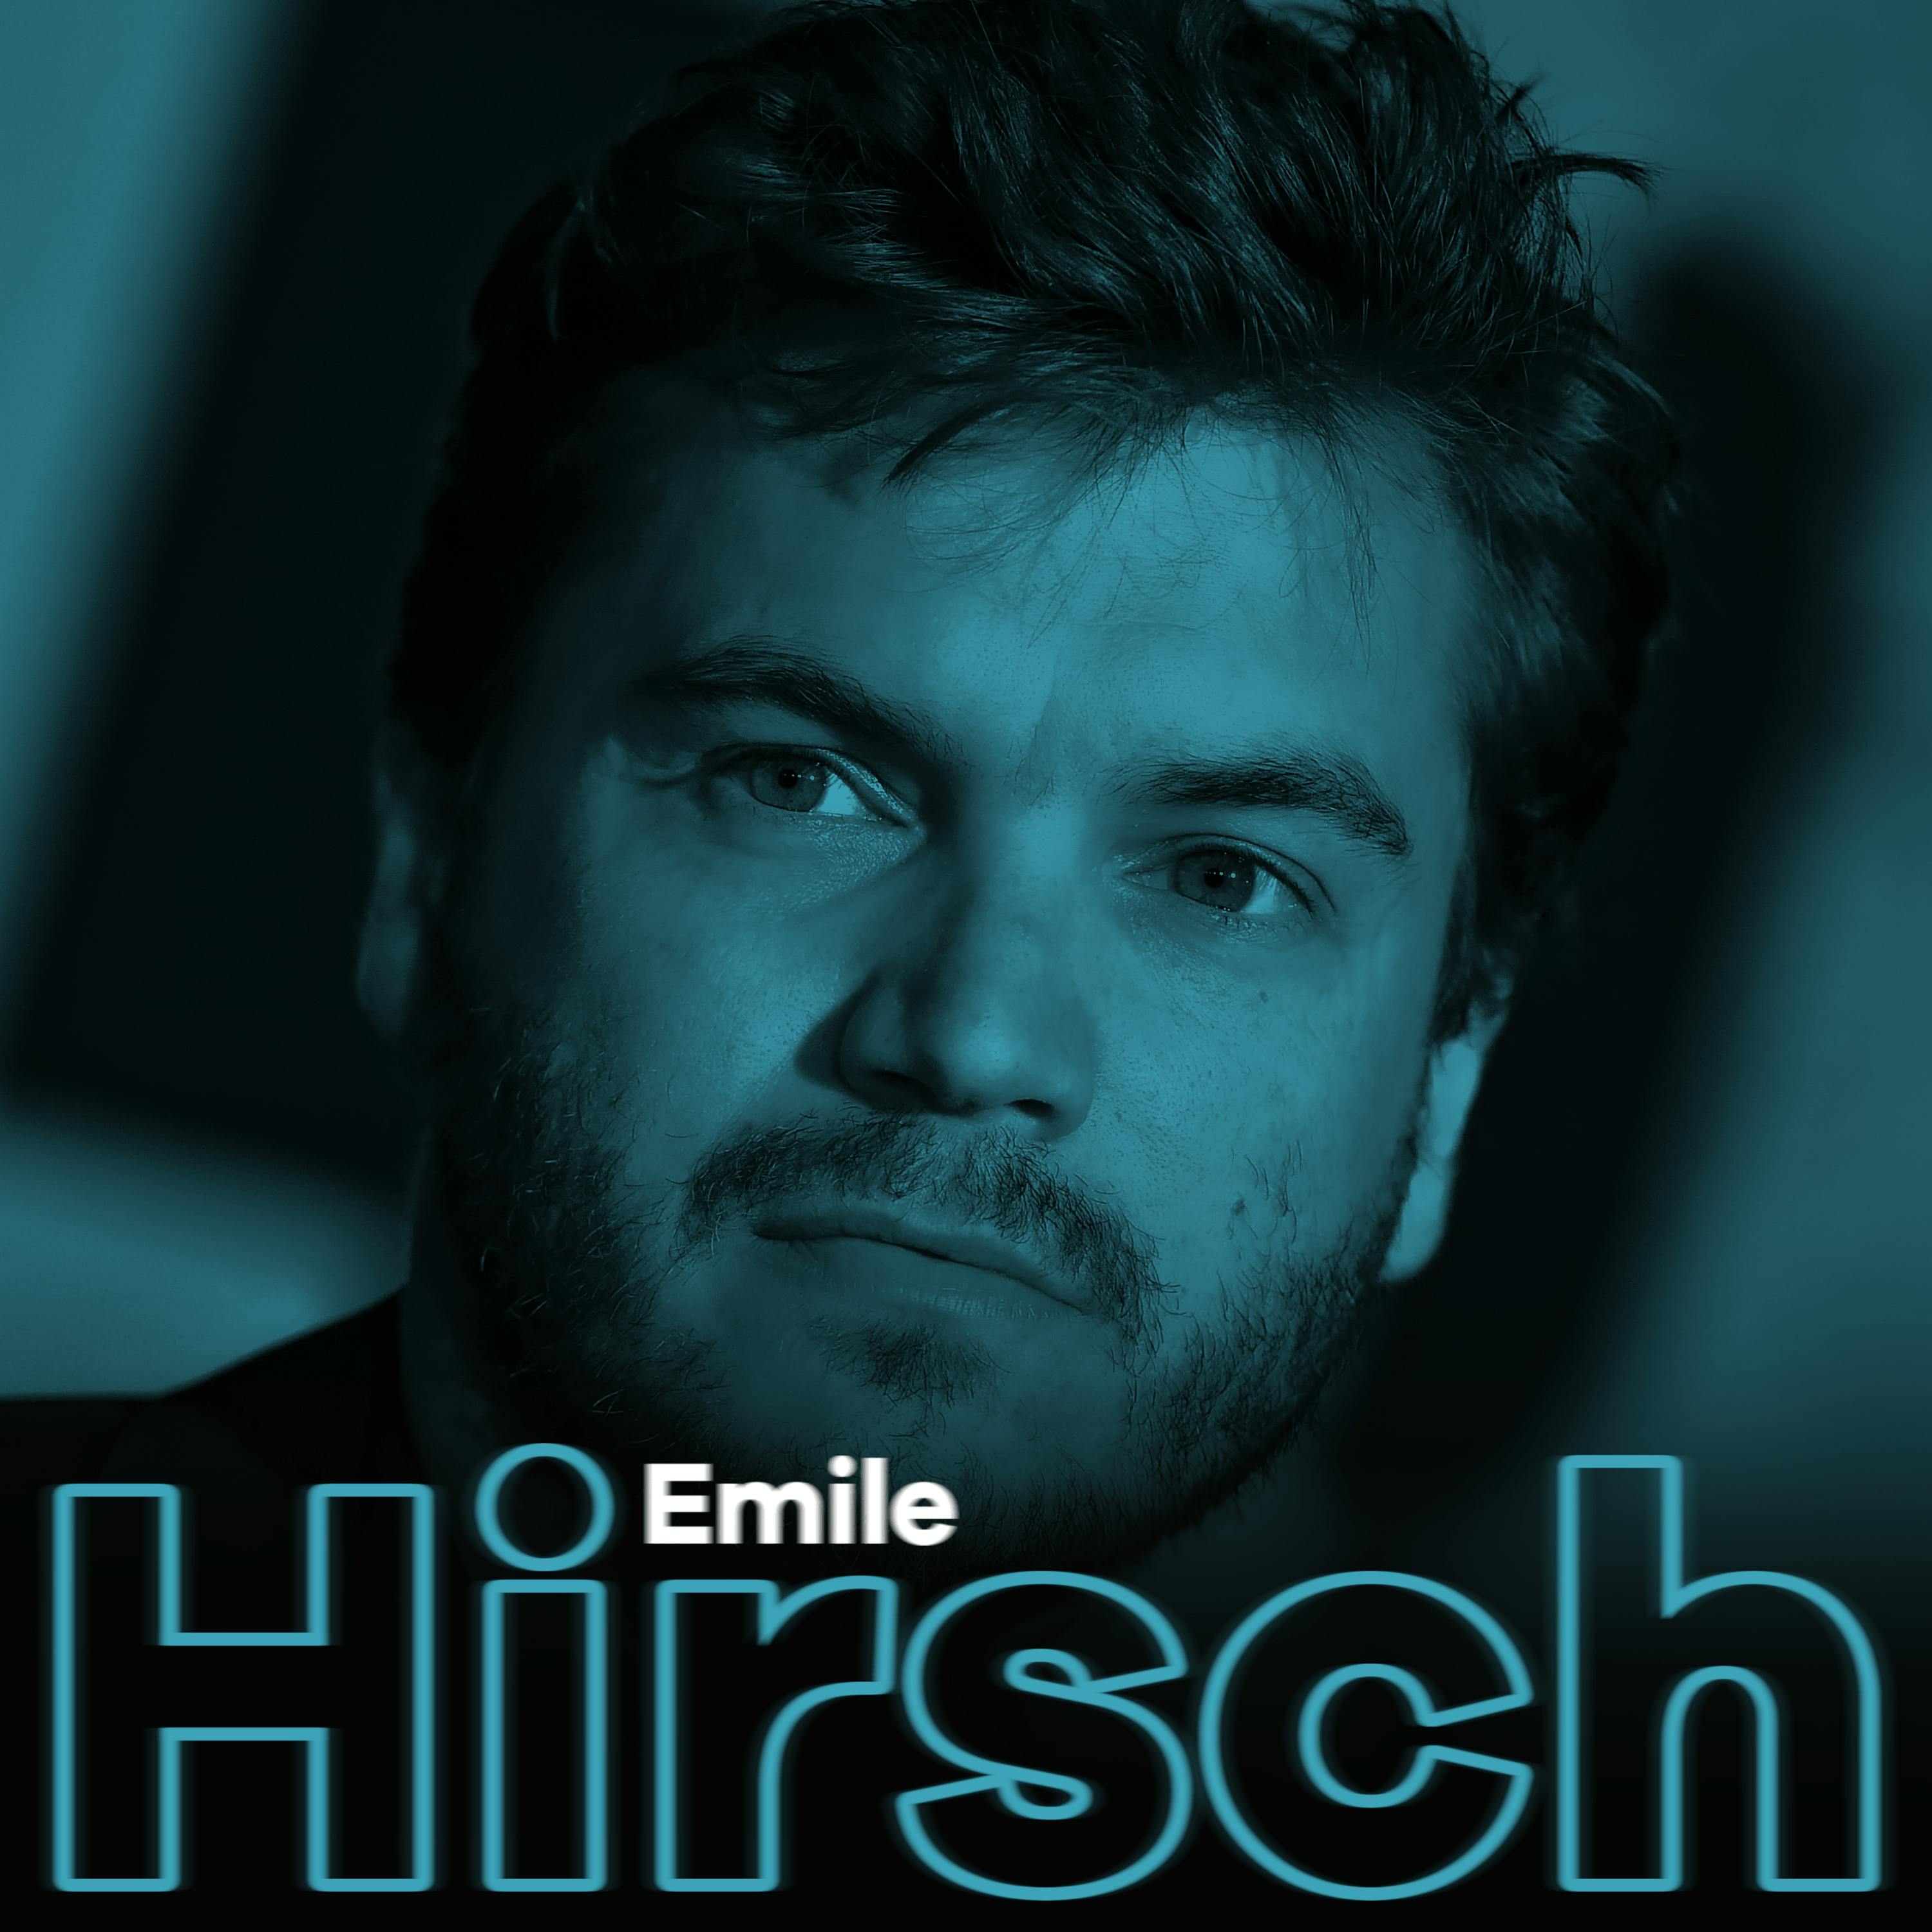 Emile Hirsch: Into the Wild & Impostor Syndrome